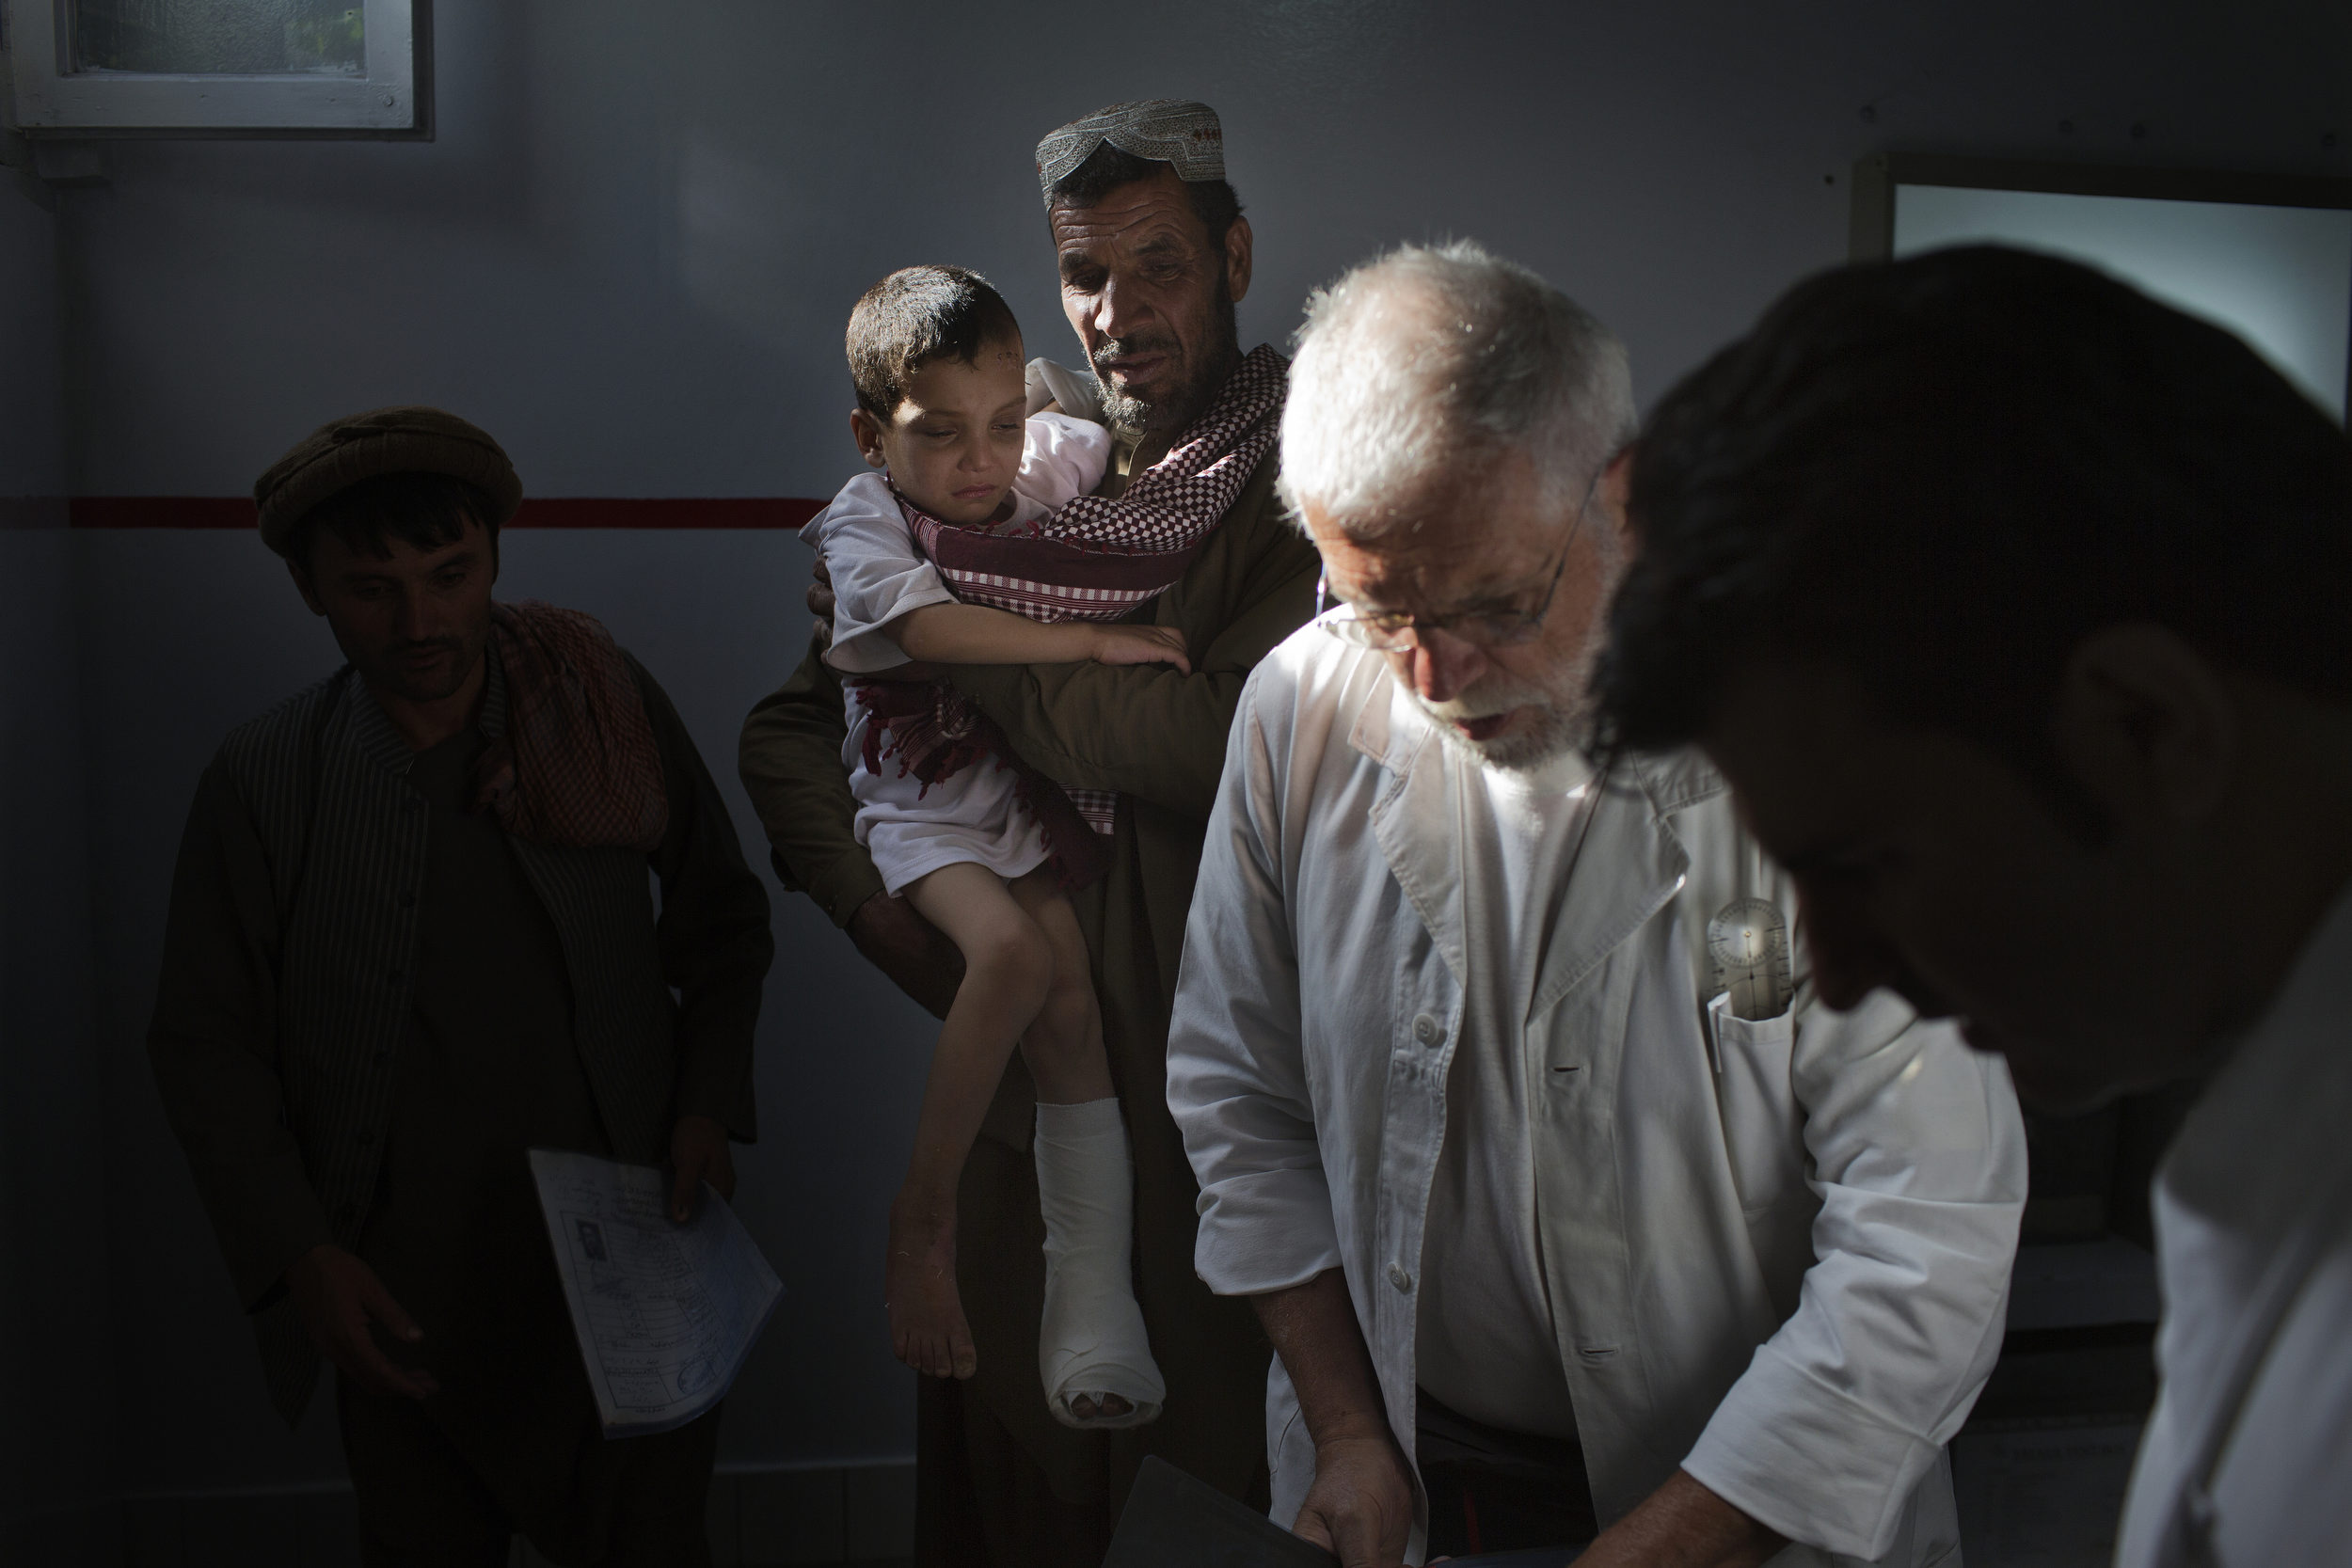  Yasef Naem, 6, is held by his father after an exam by Dr. Alberto Landini. 